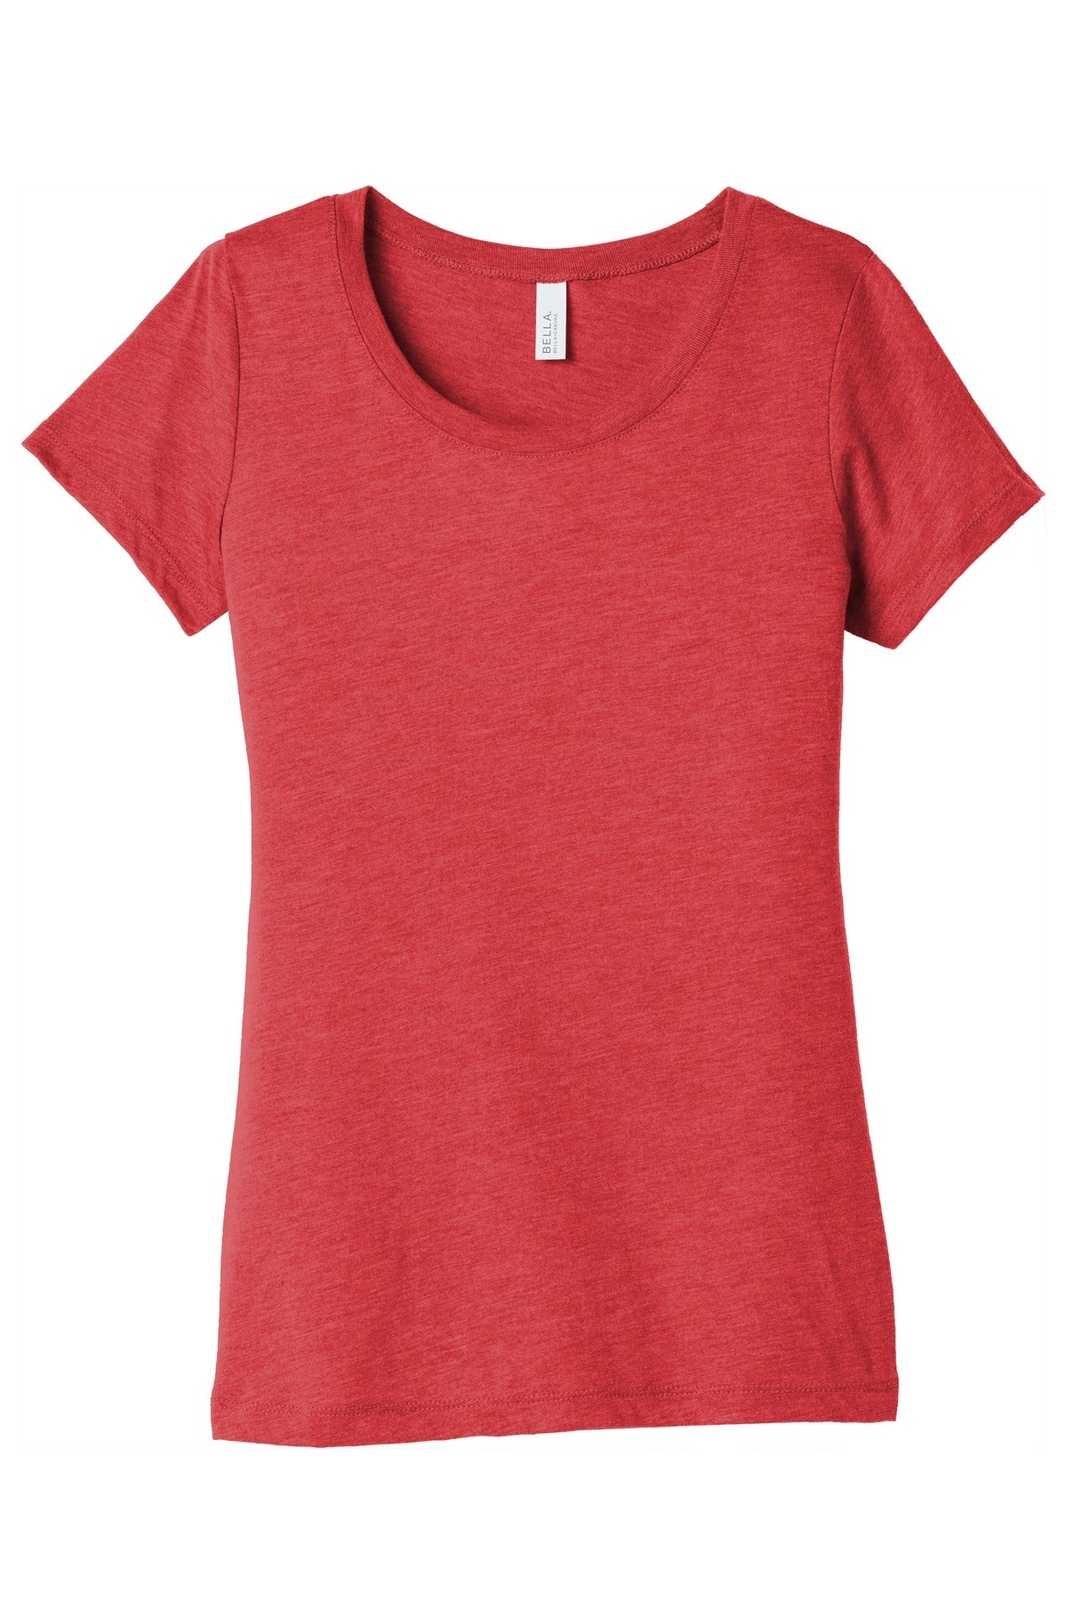 Bella + Canvas 8413 Women's Triblend Short Sleeve Tee - Red Triblend - HIT a Double